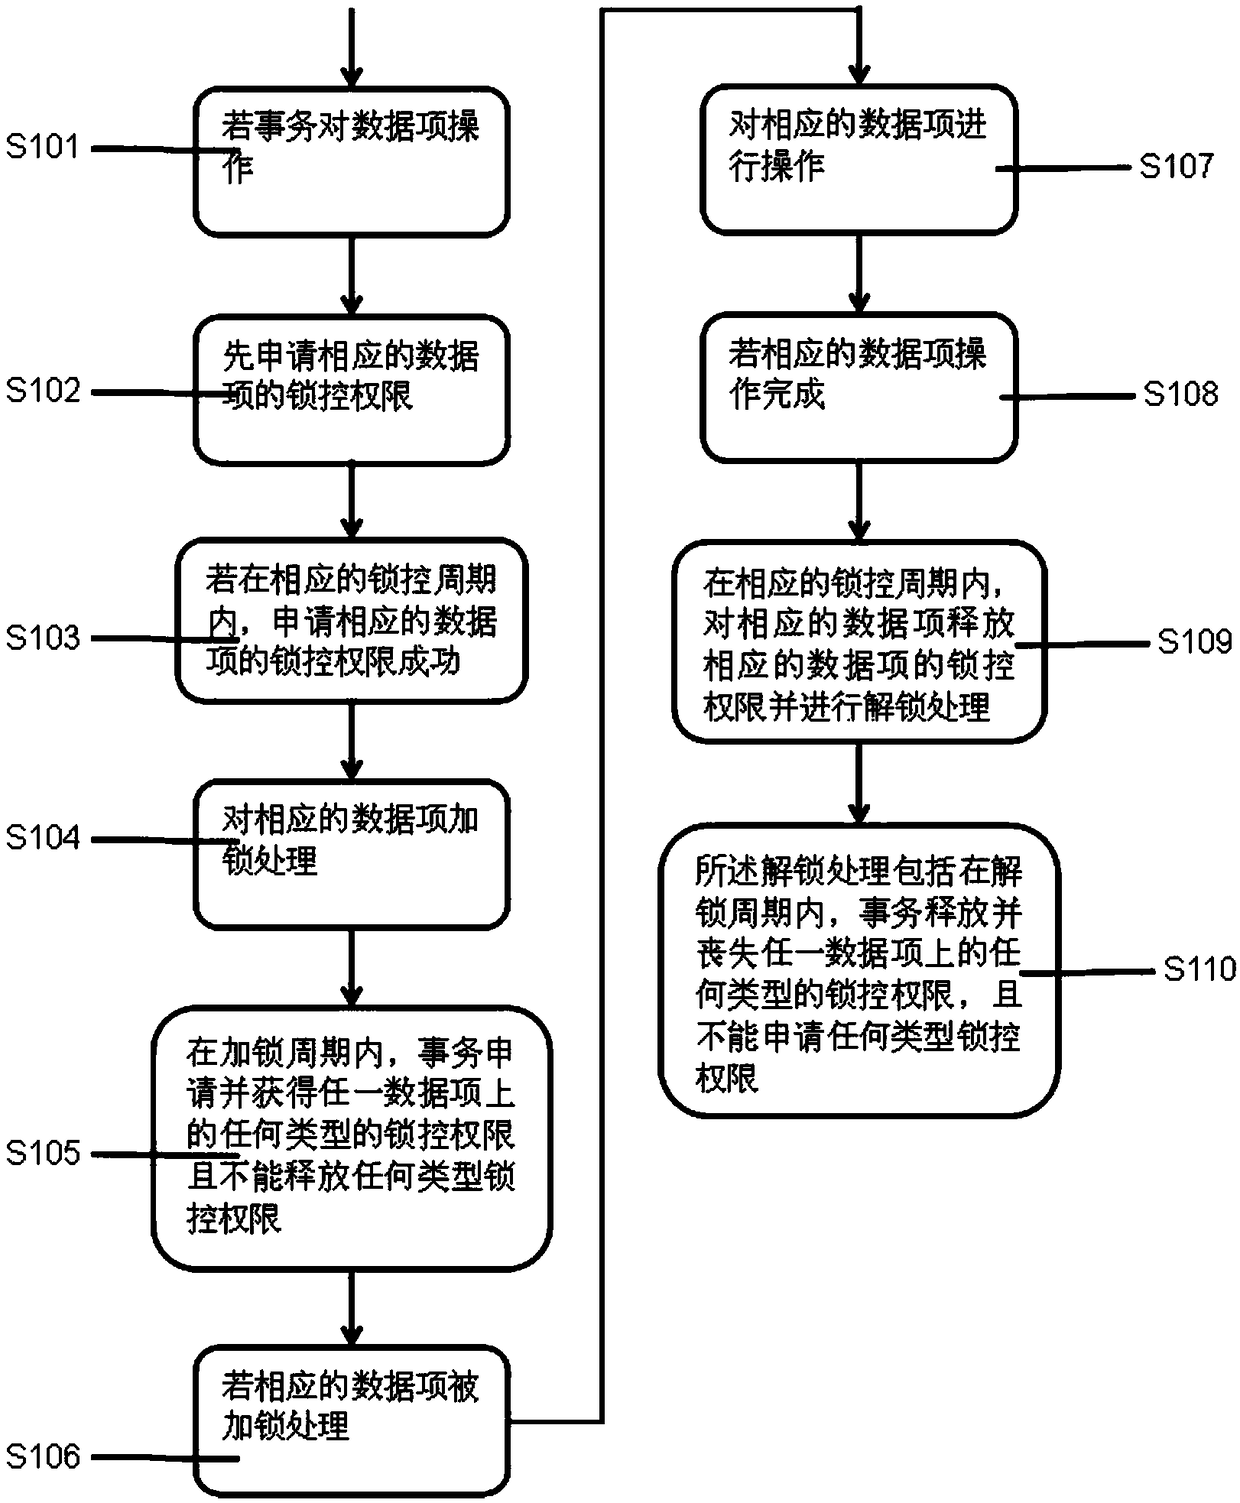 Field data information security control method and system for distributed centralized control system